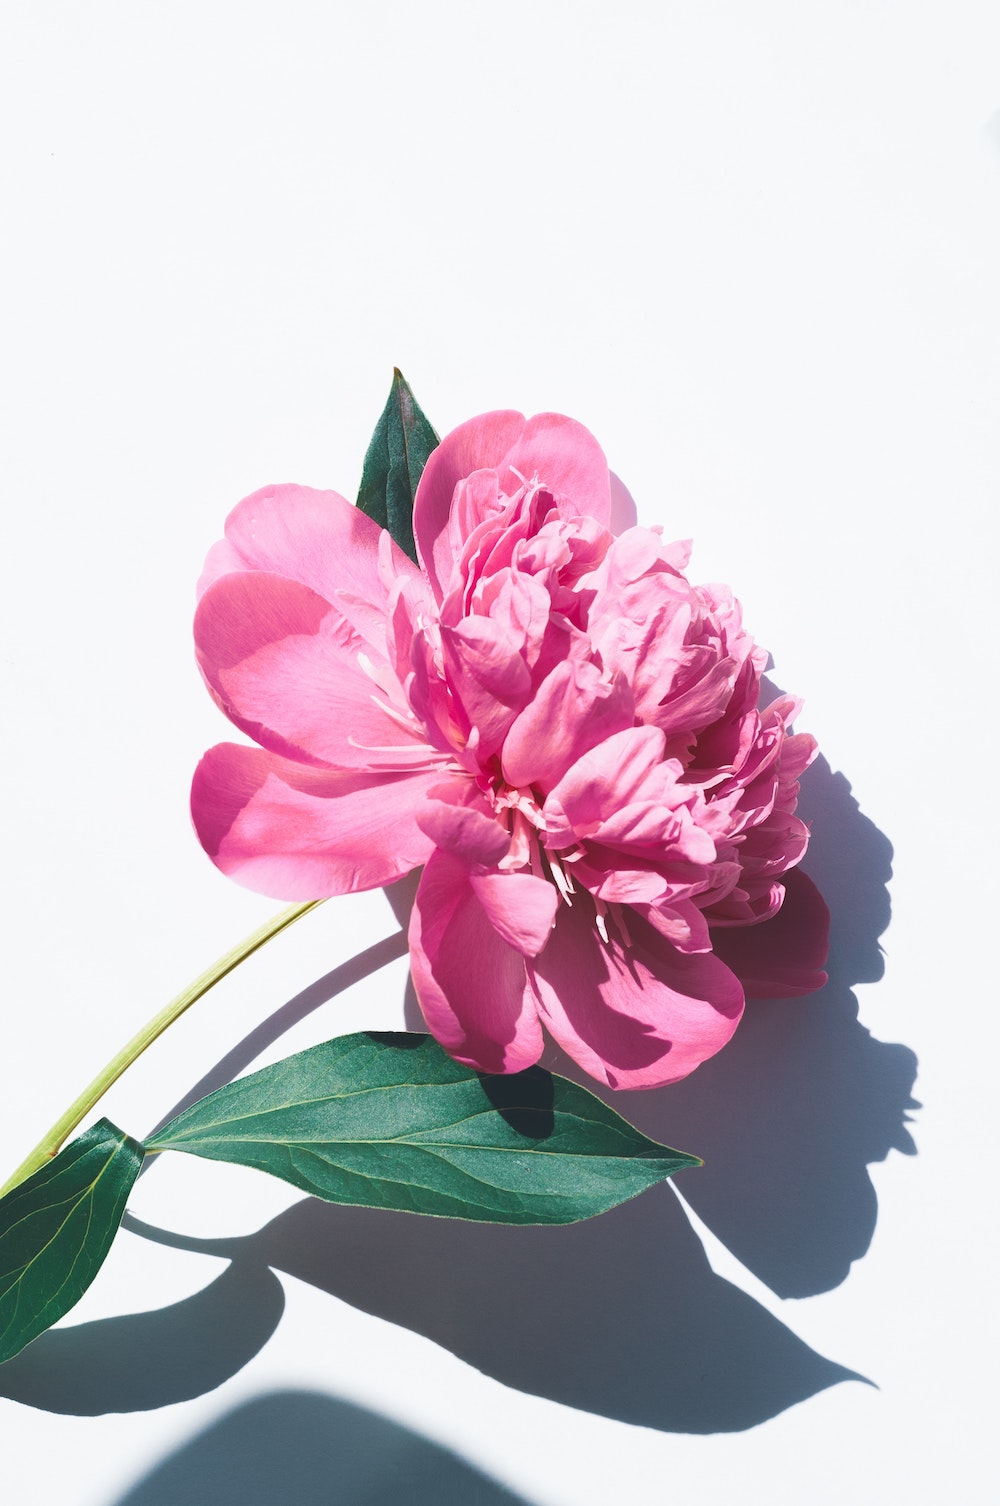 The meaning of peonies in Greek mythology - on Thursd